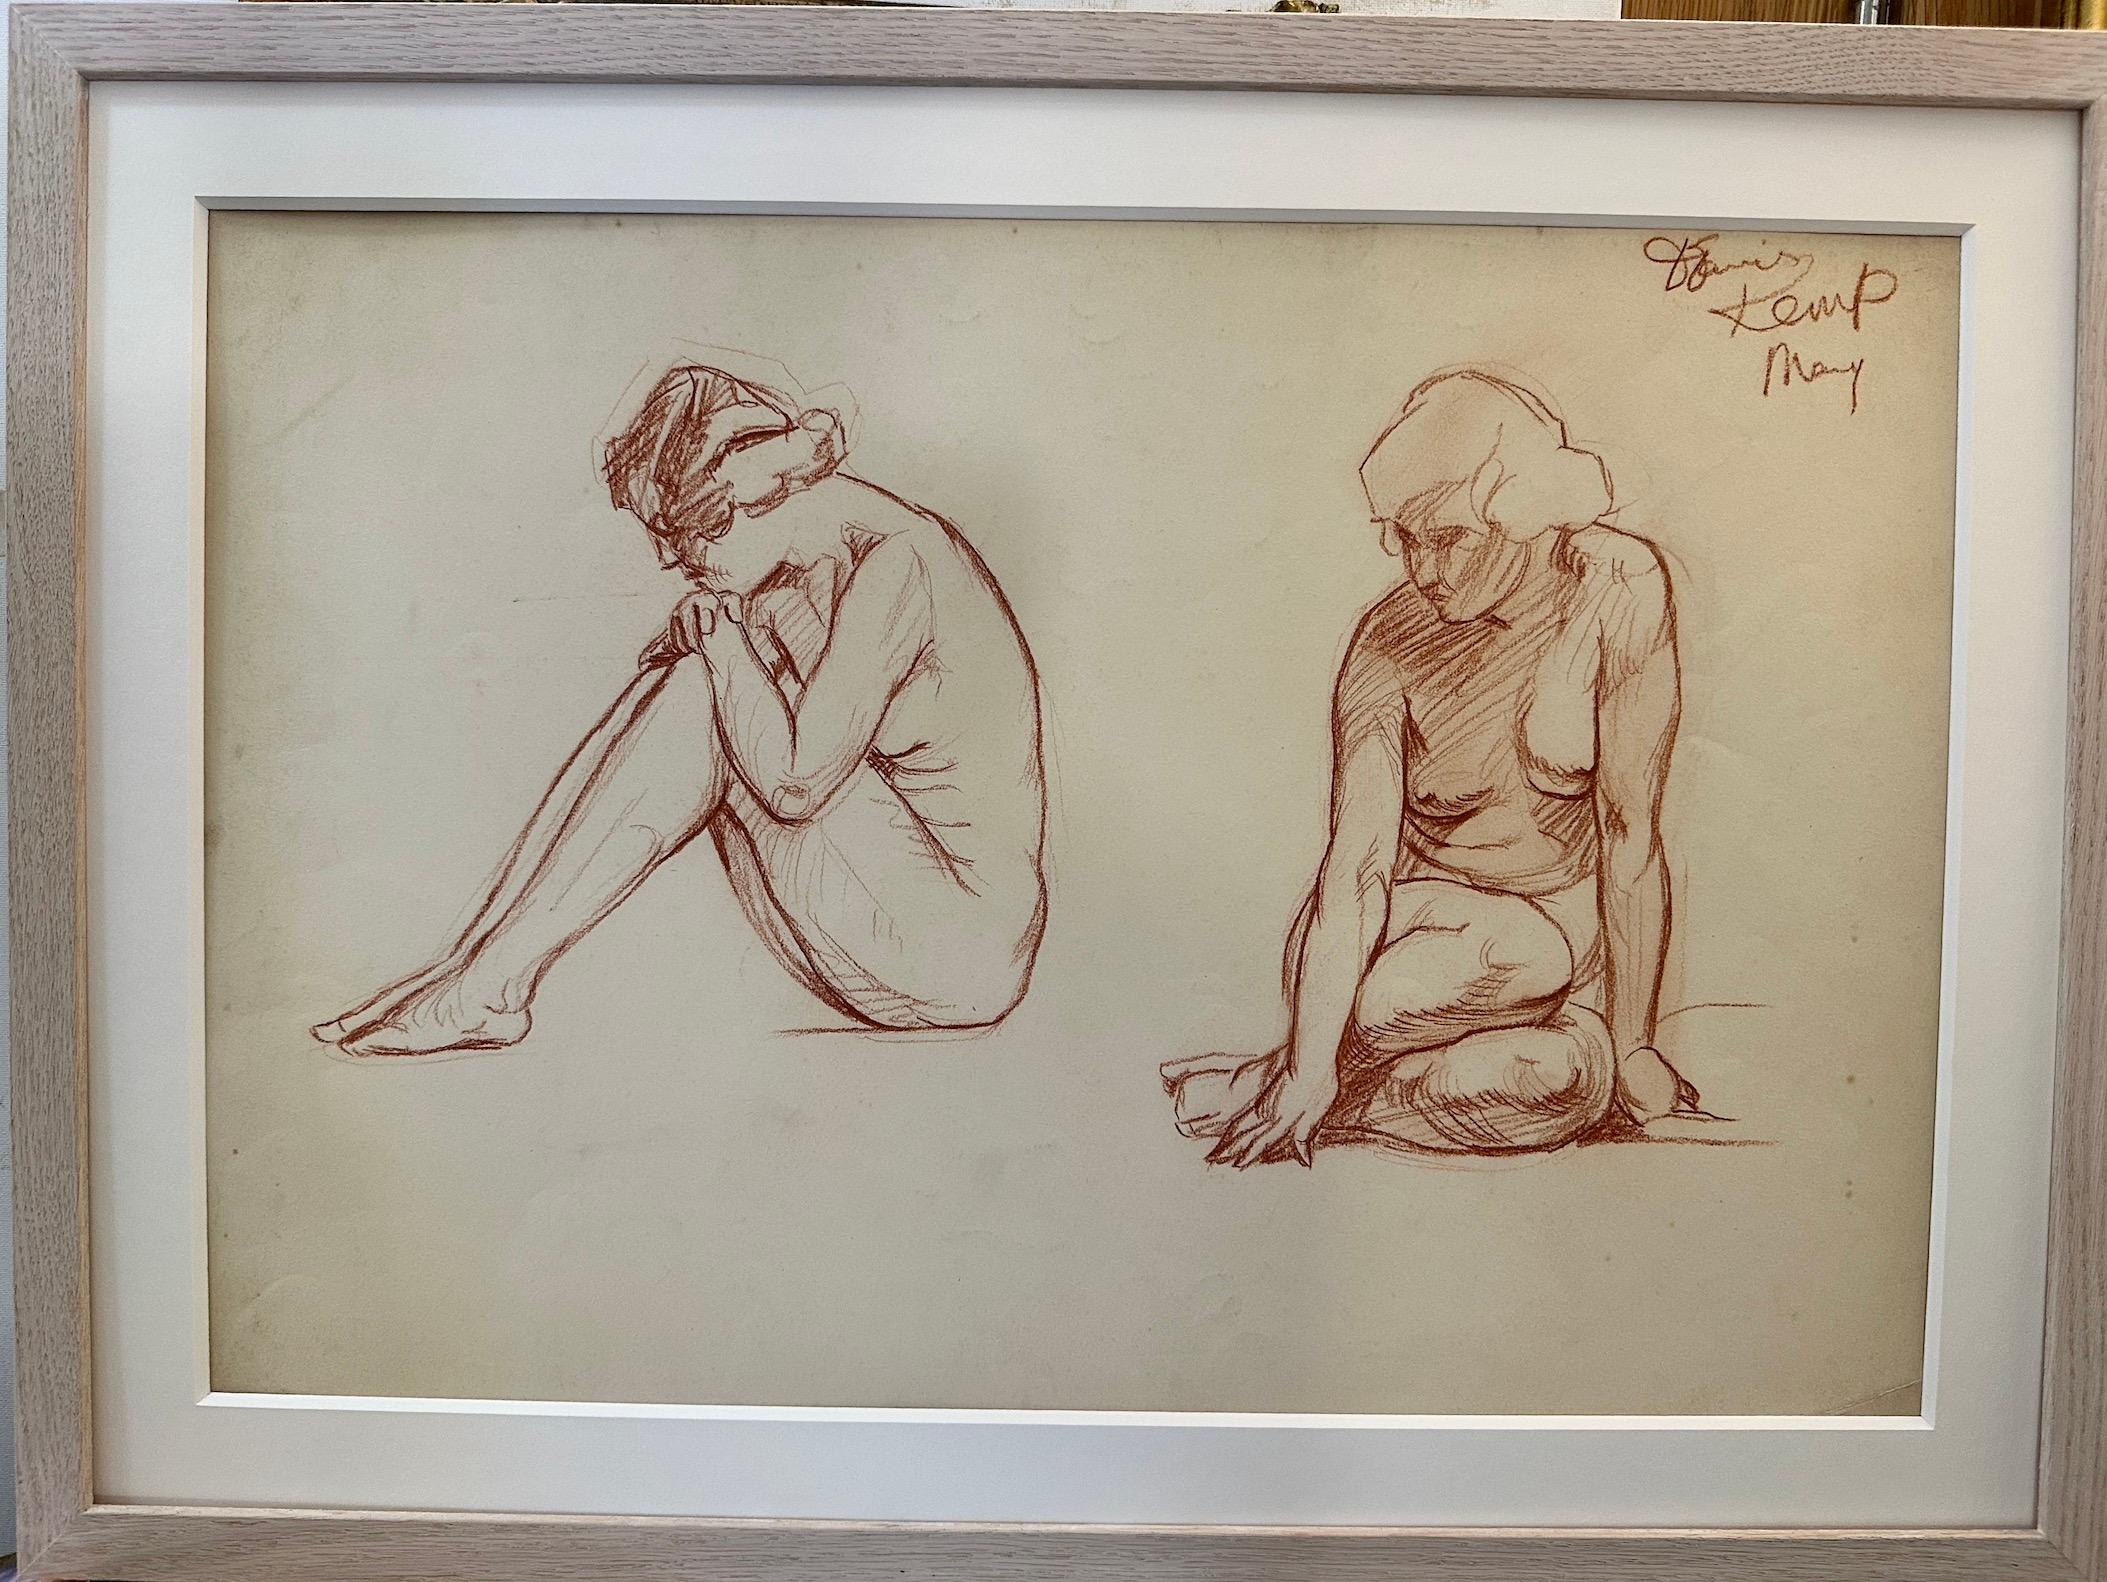 Davis Kemp  Figurative Painting - Early 20th century Red Chalk drawing of Art Deco nude women with Bob hair style